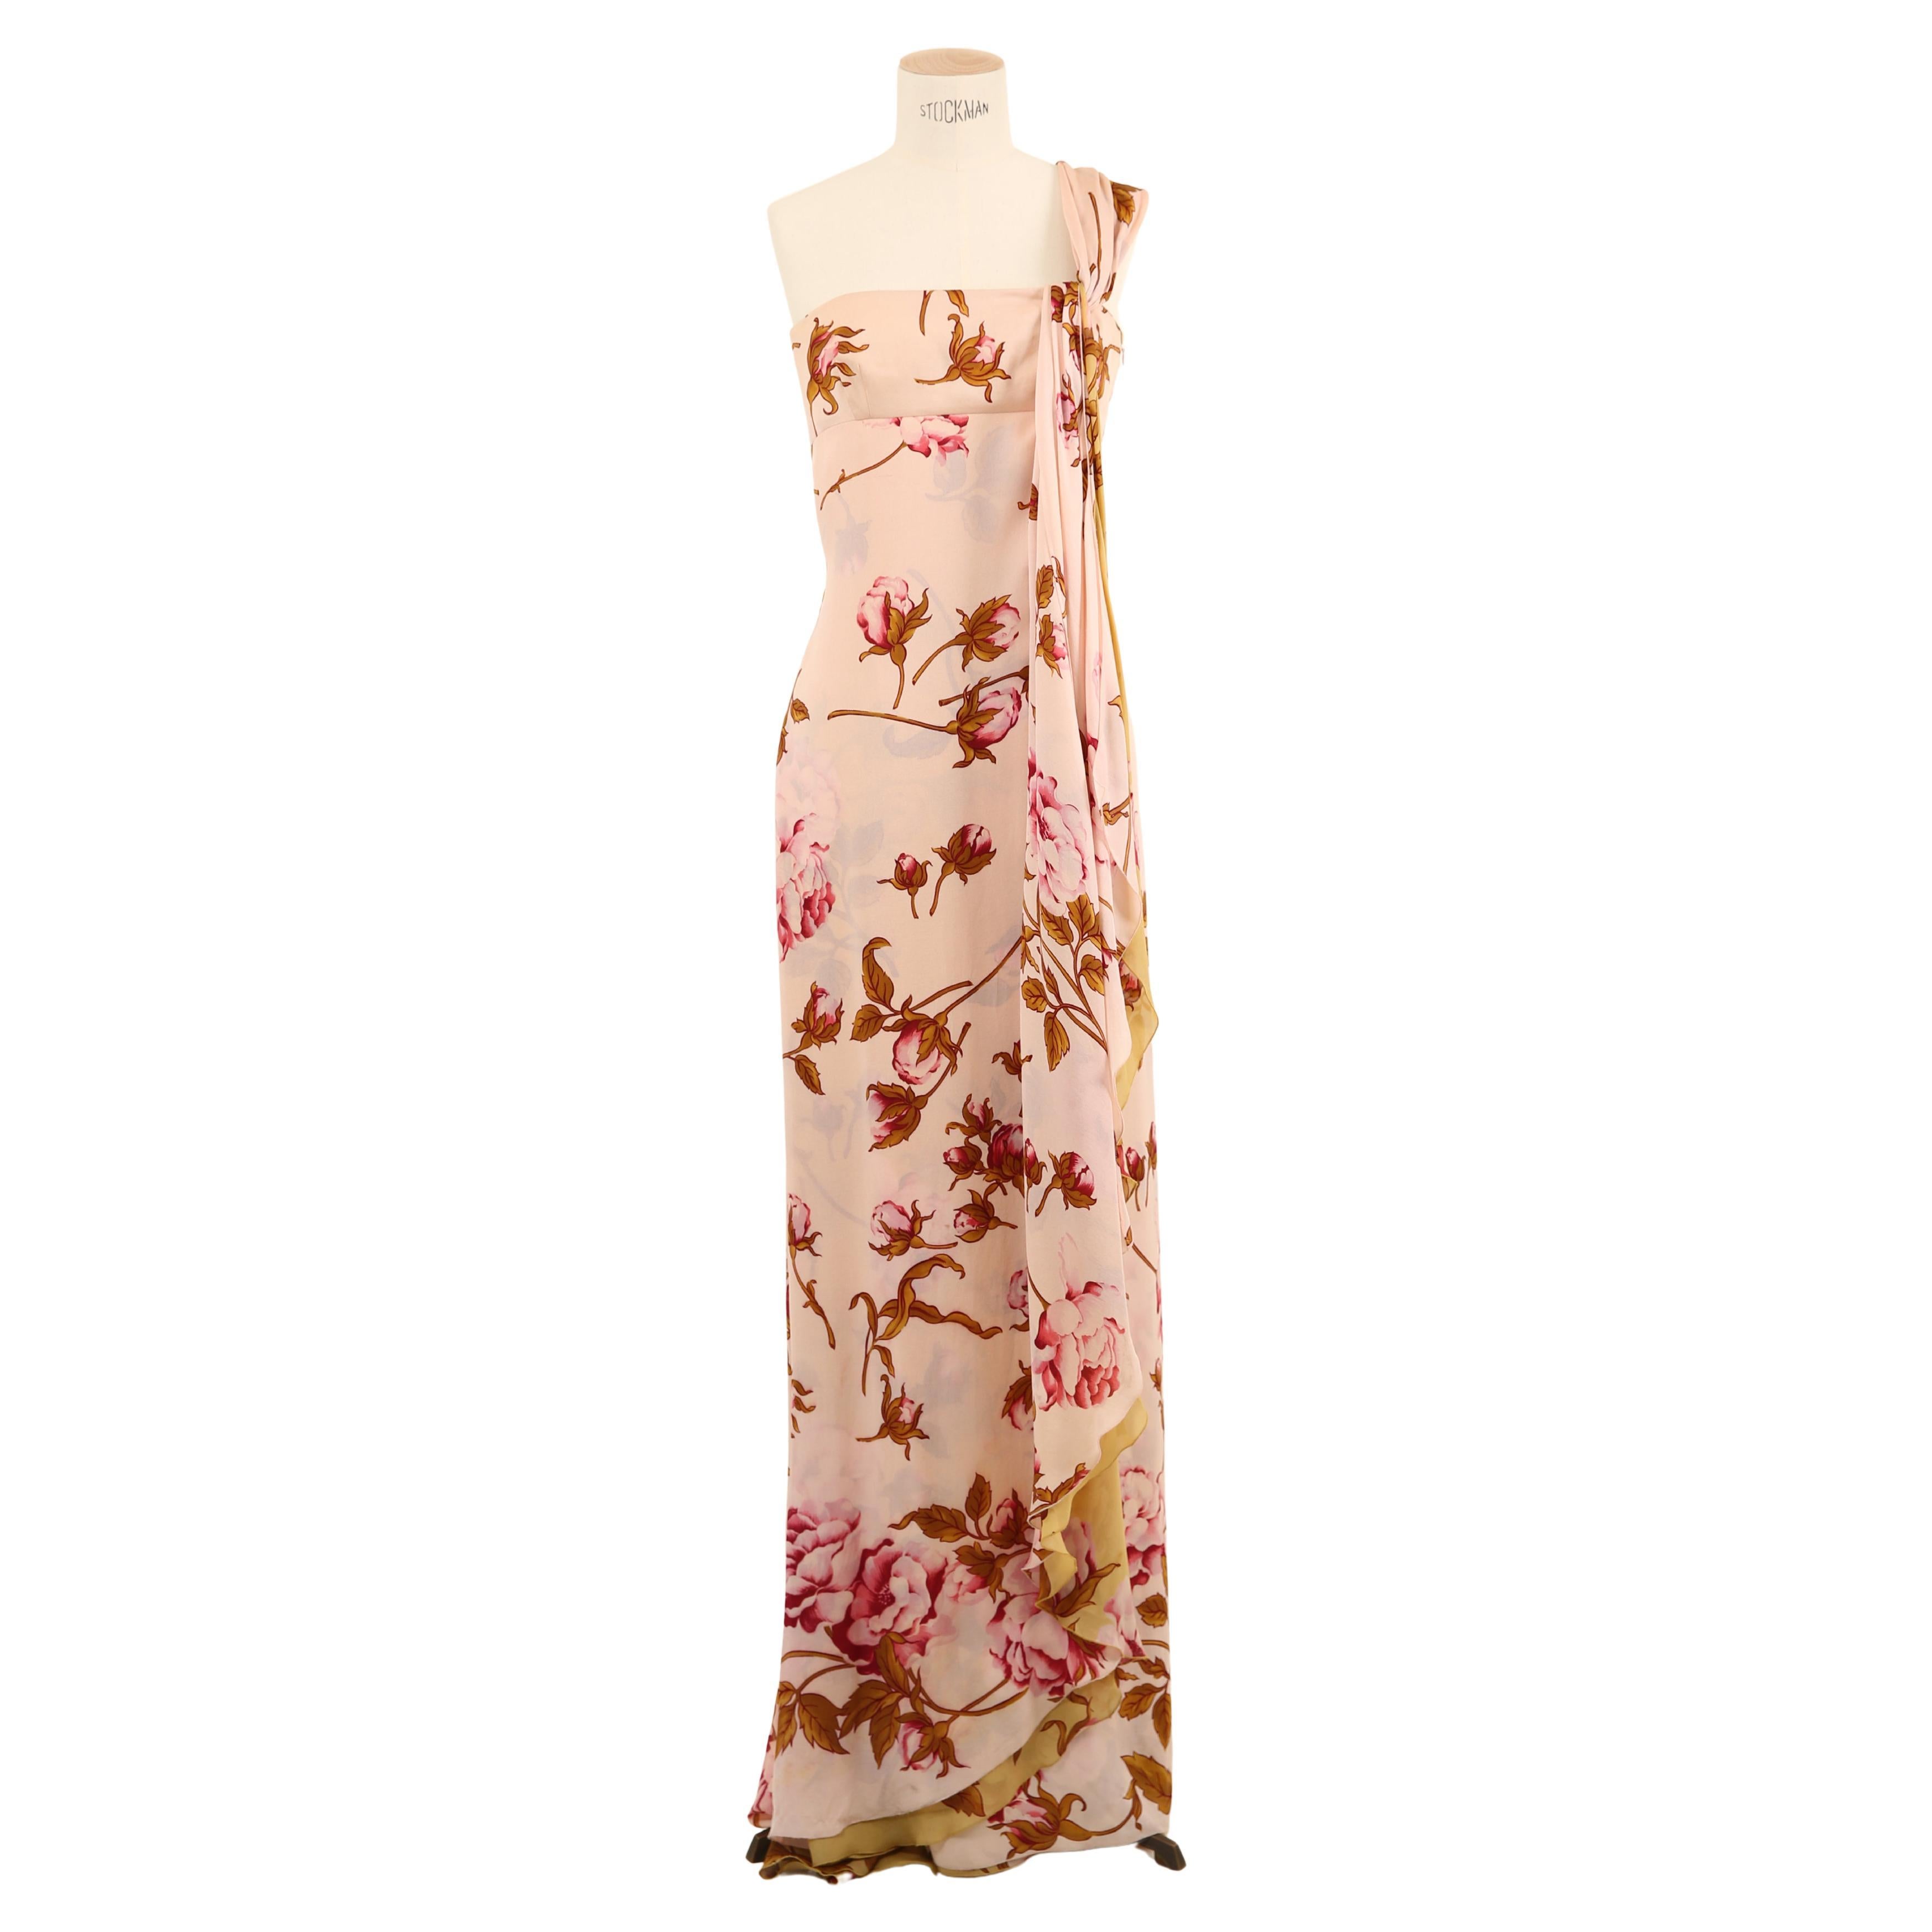 Valentino S/S 06 pink yellow rose print floral one shoulder gown train dress For Sale